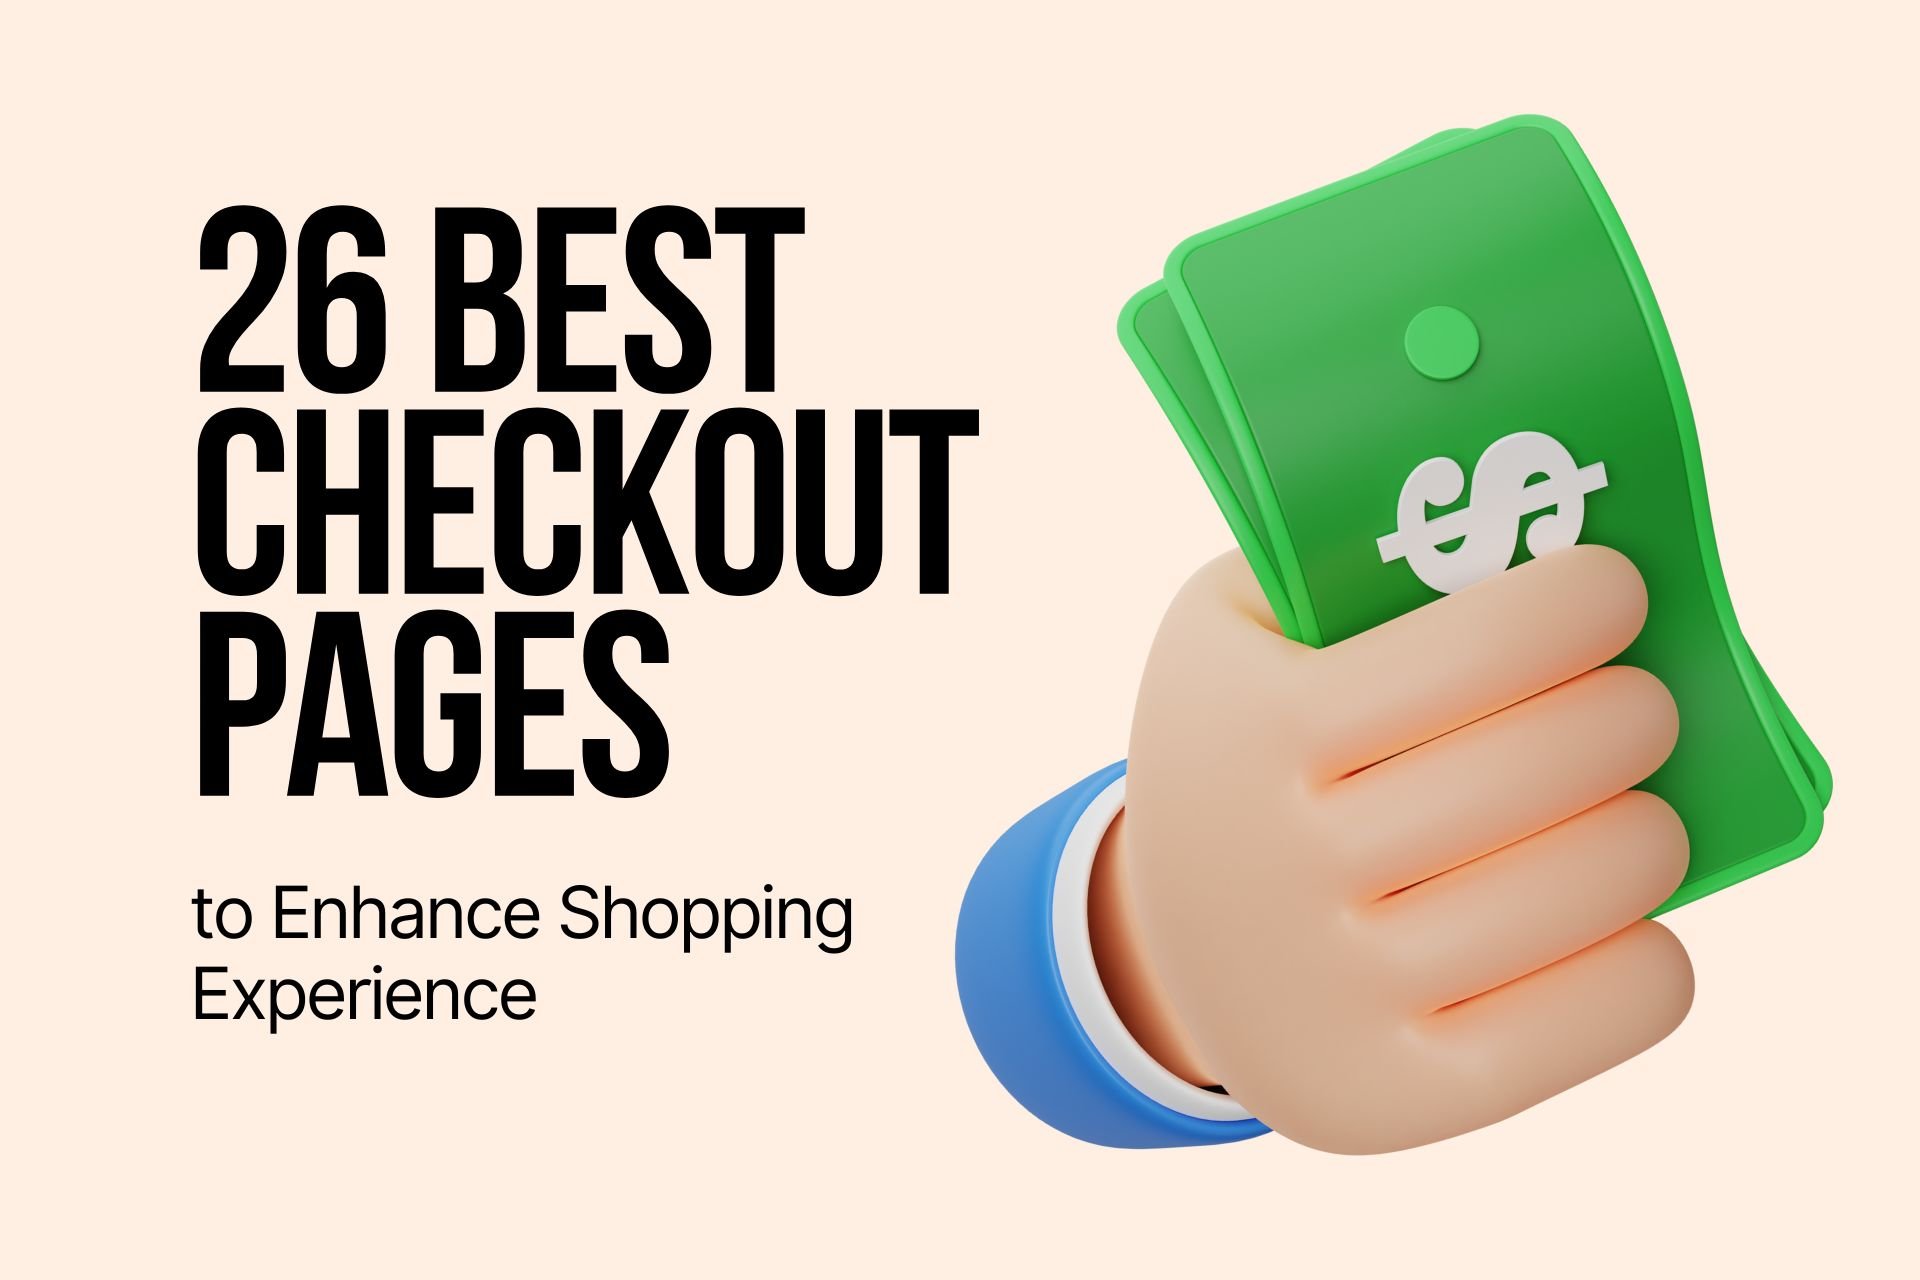 26 Best Checkout Pages to Enhance Shopping Experience